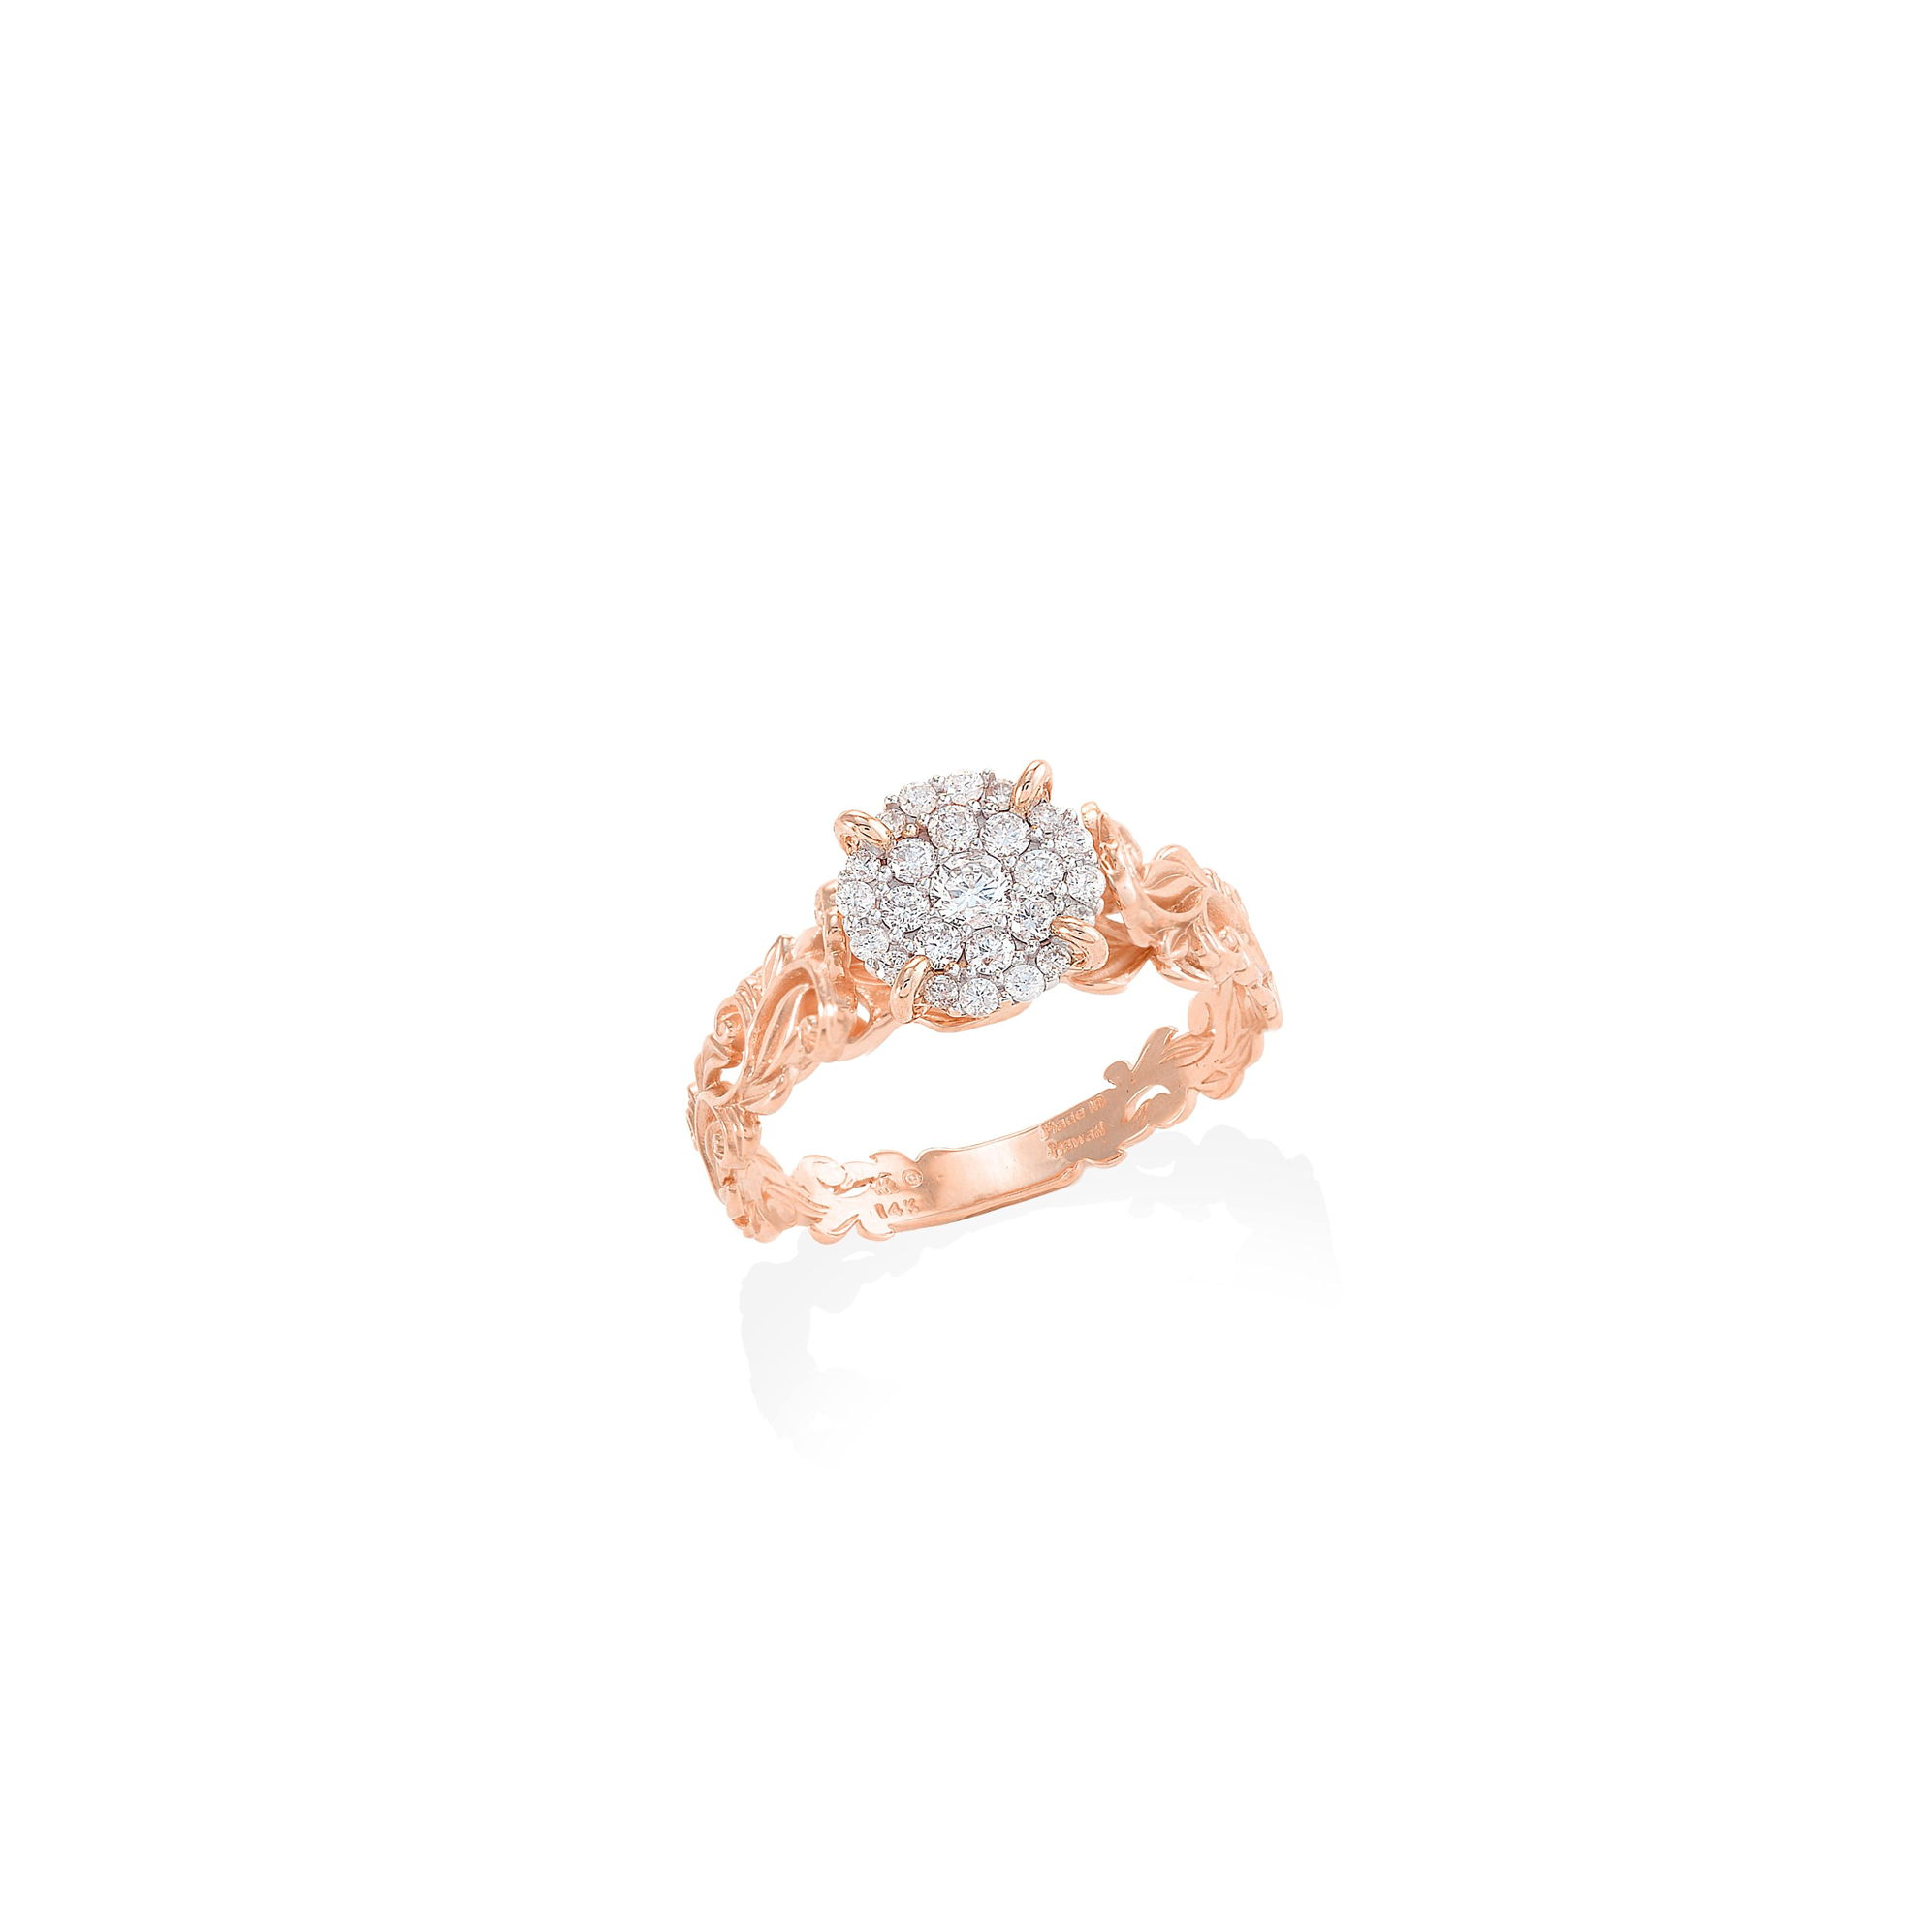 Living Heirloom Engagement Ring in Rose Gold with Diamonds